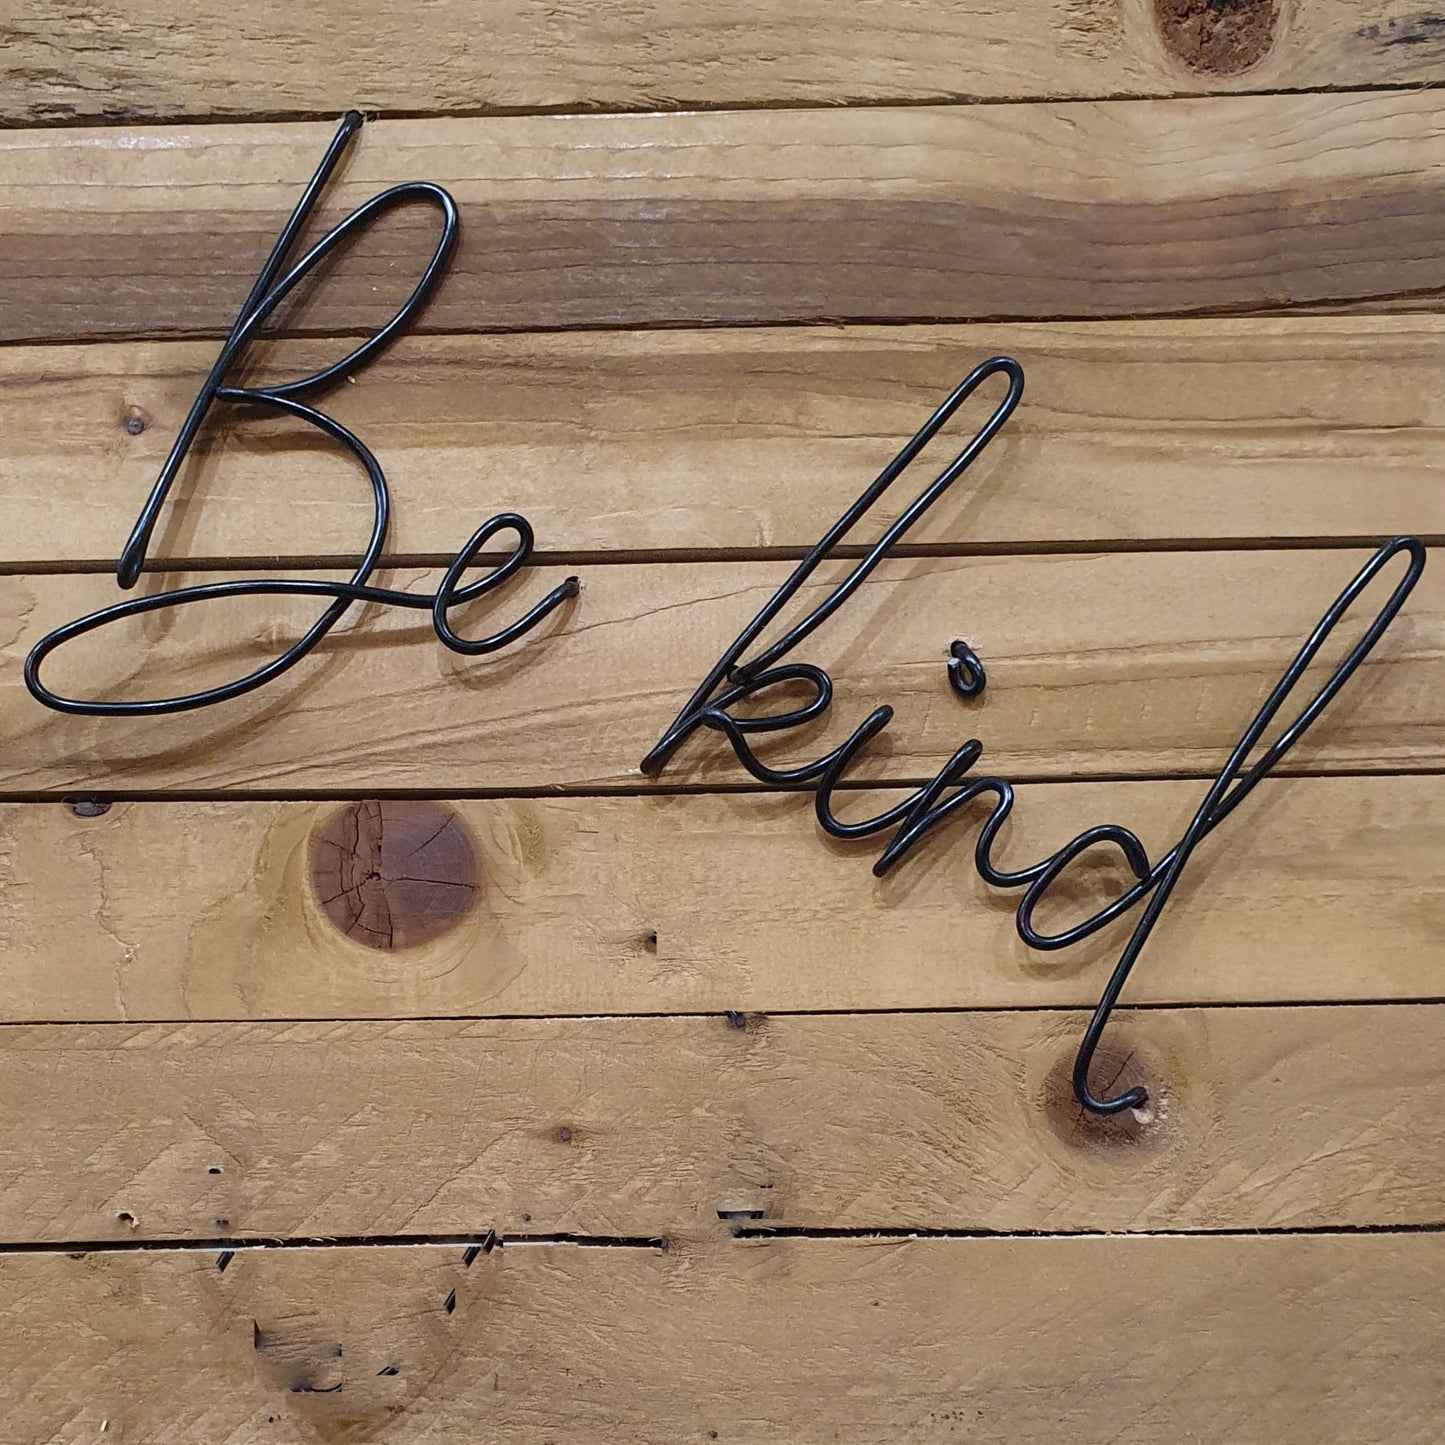 Gold Be Kind Wire Words Wall Art Decoration on a Wood Panel Wall